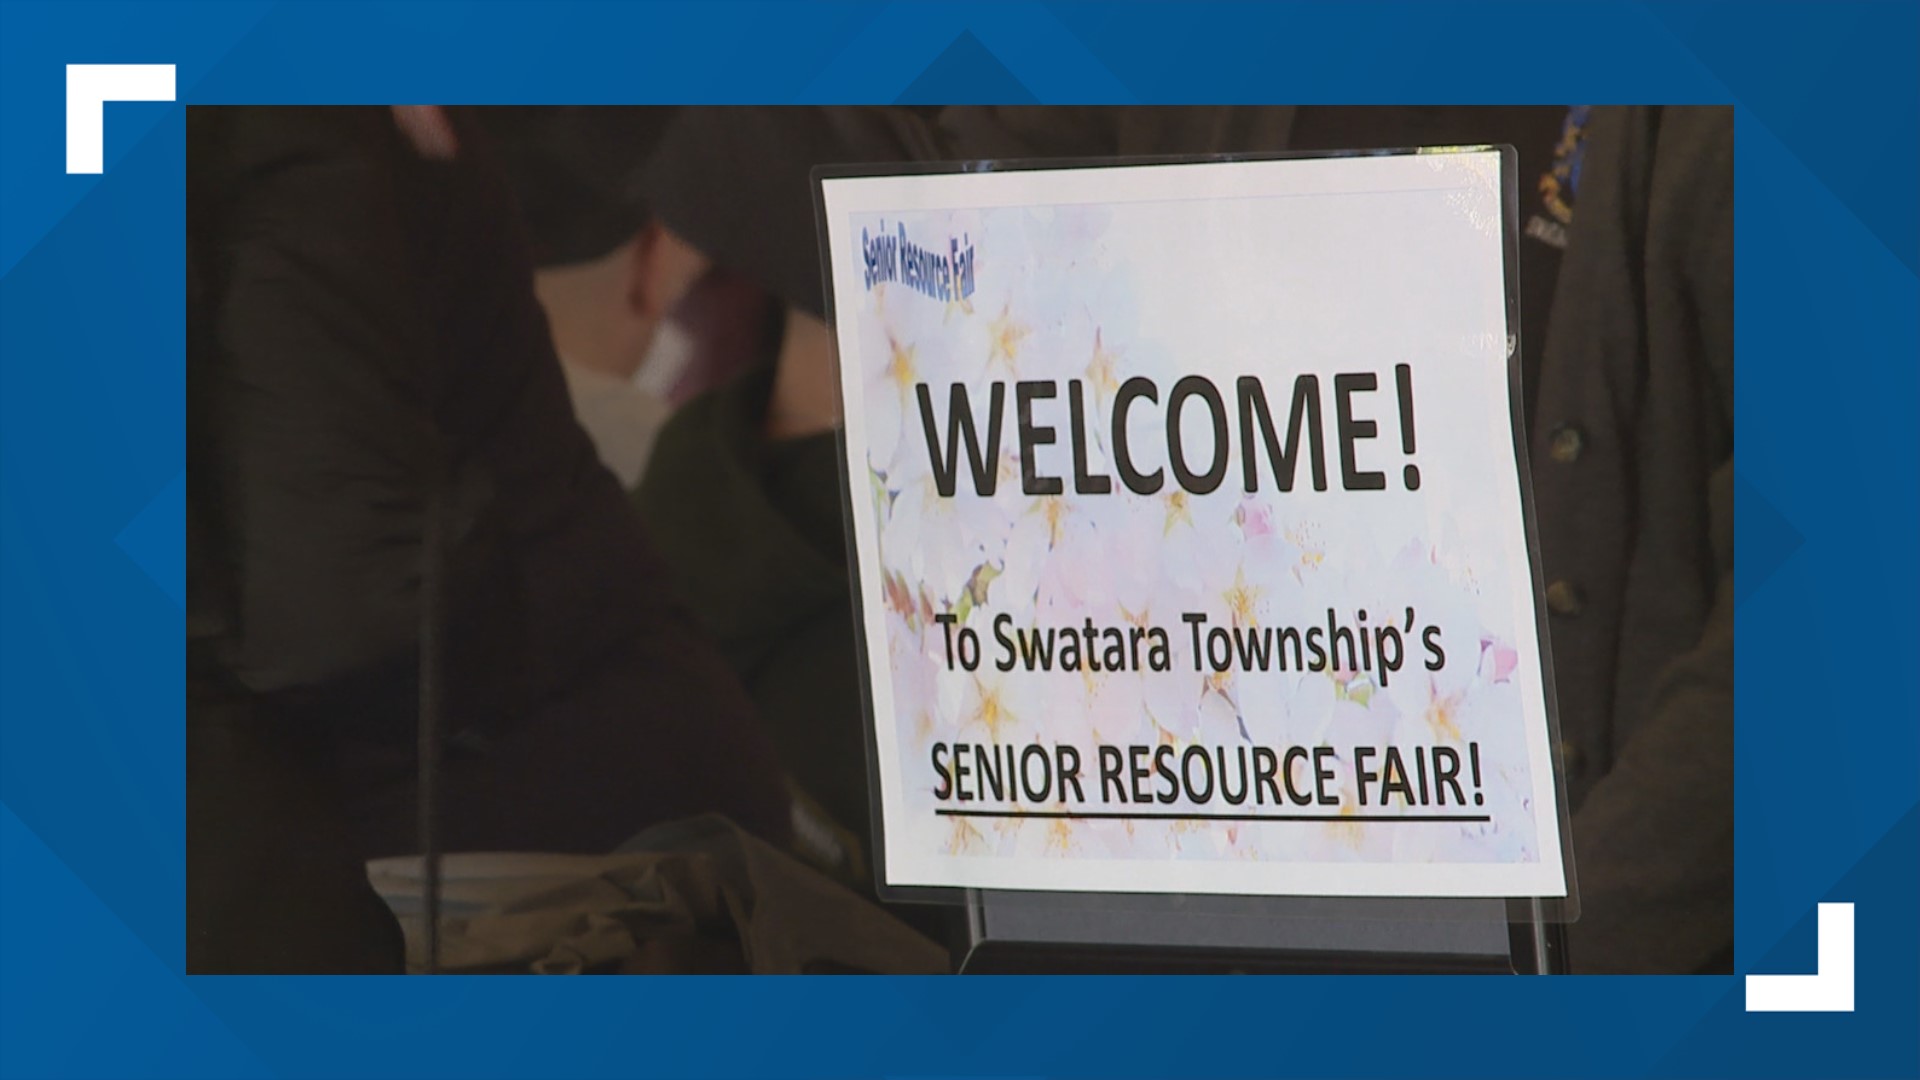 Swatara Township hosted the first Senior Resource Fair to offer in-person resources to seniors to help mitigate potential scam victims.